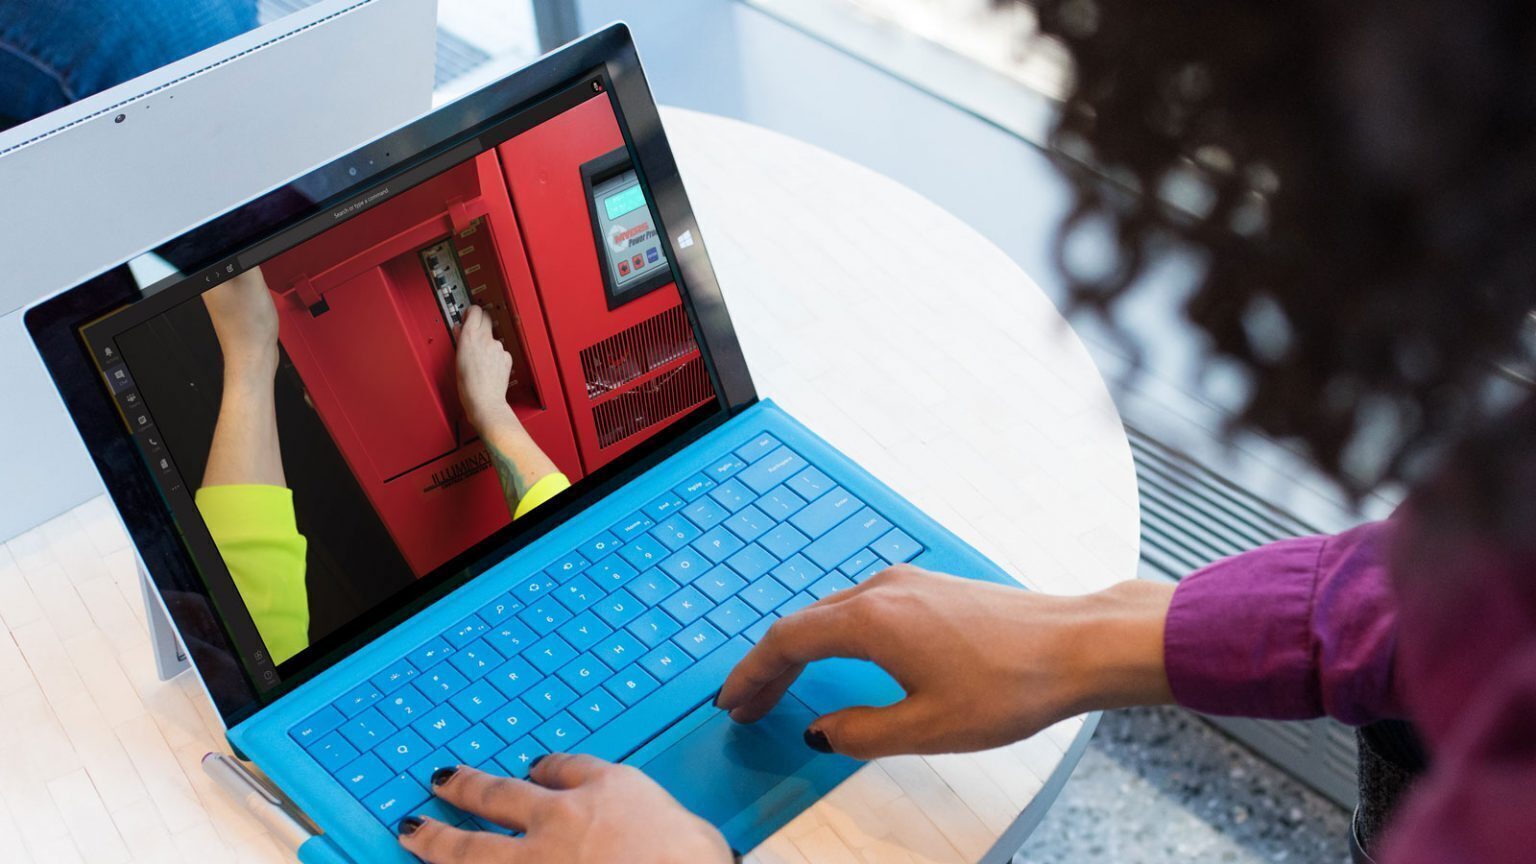 With Viva, Microsoft aims to augment the employee experience